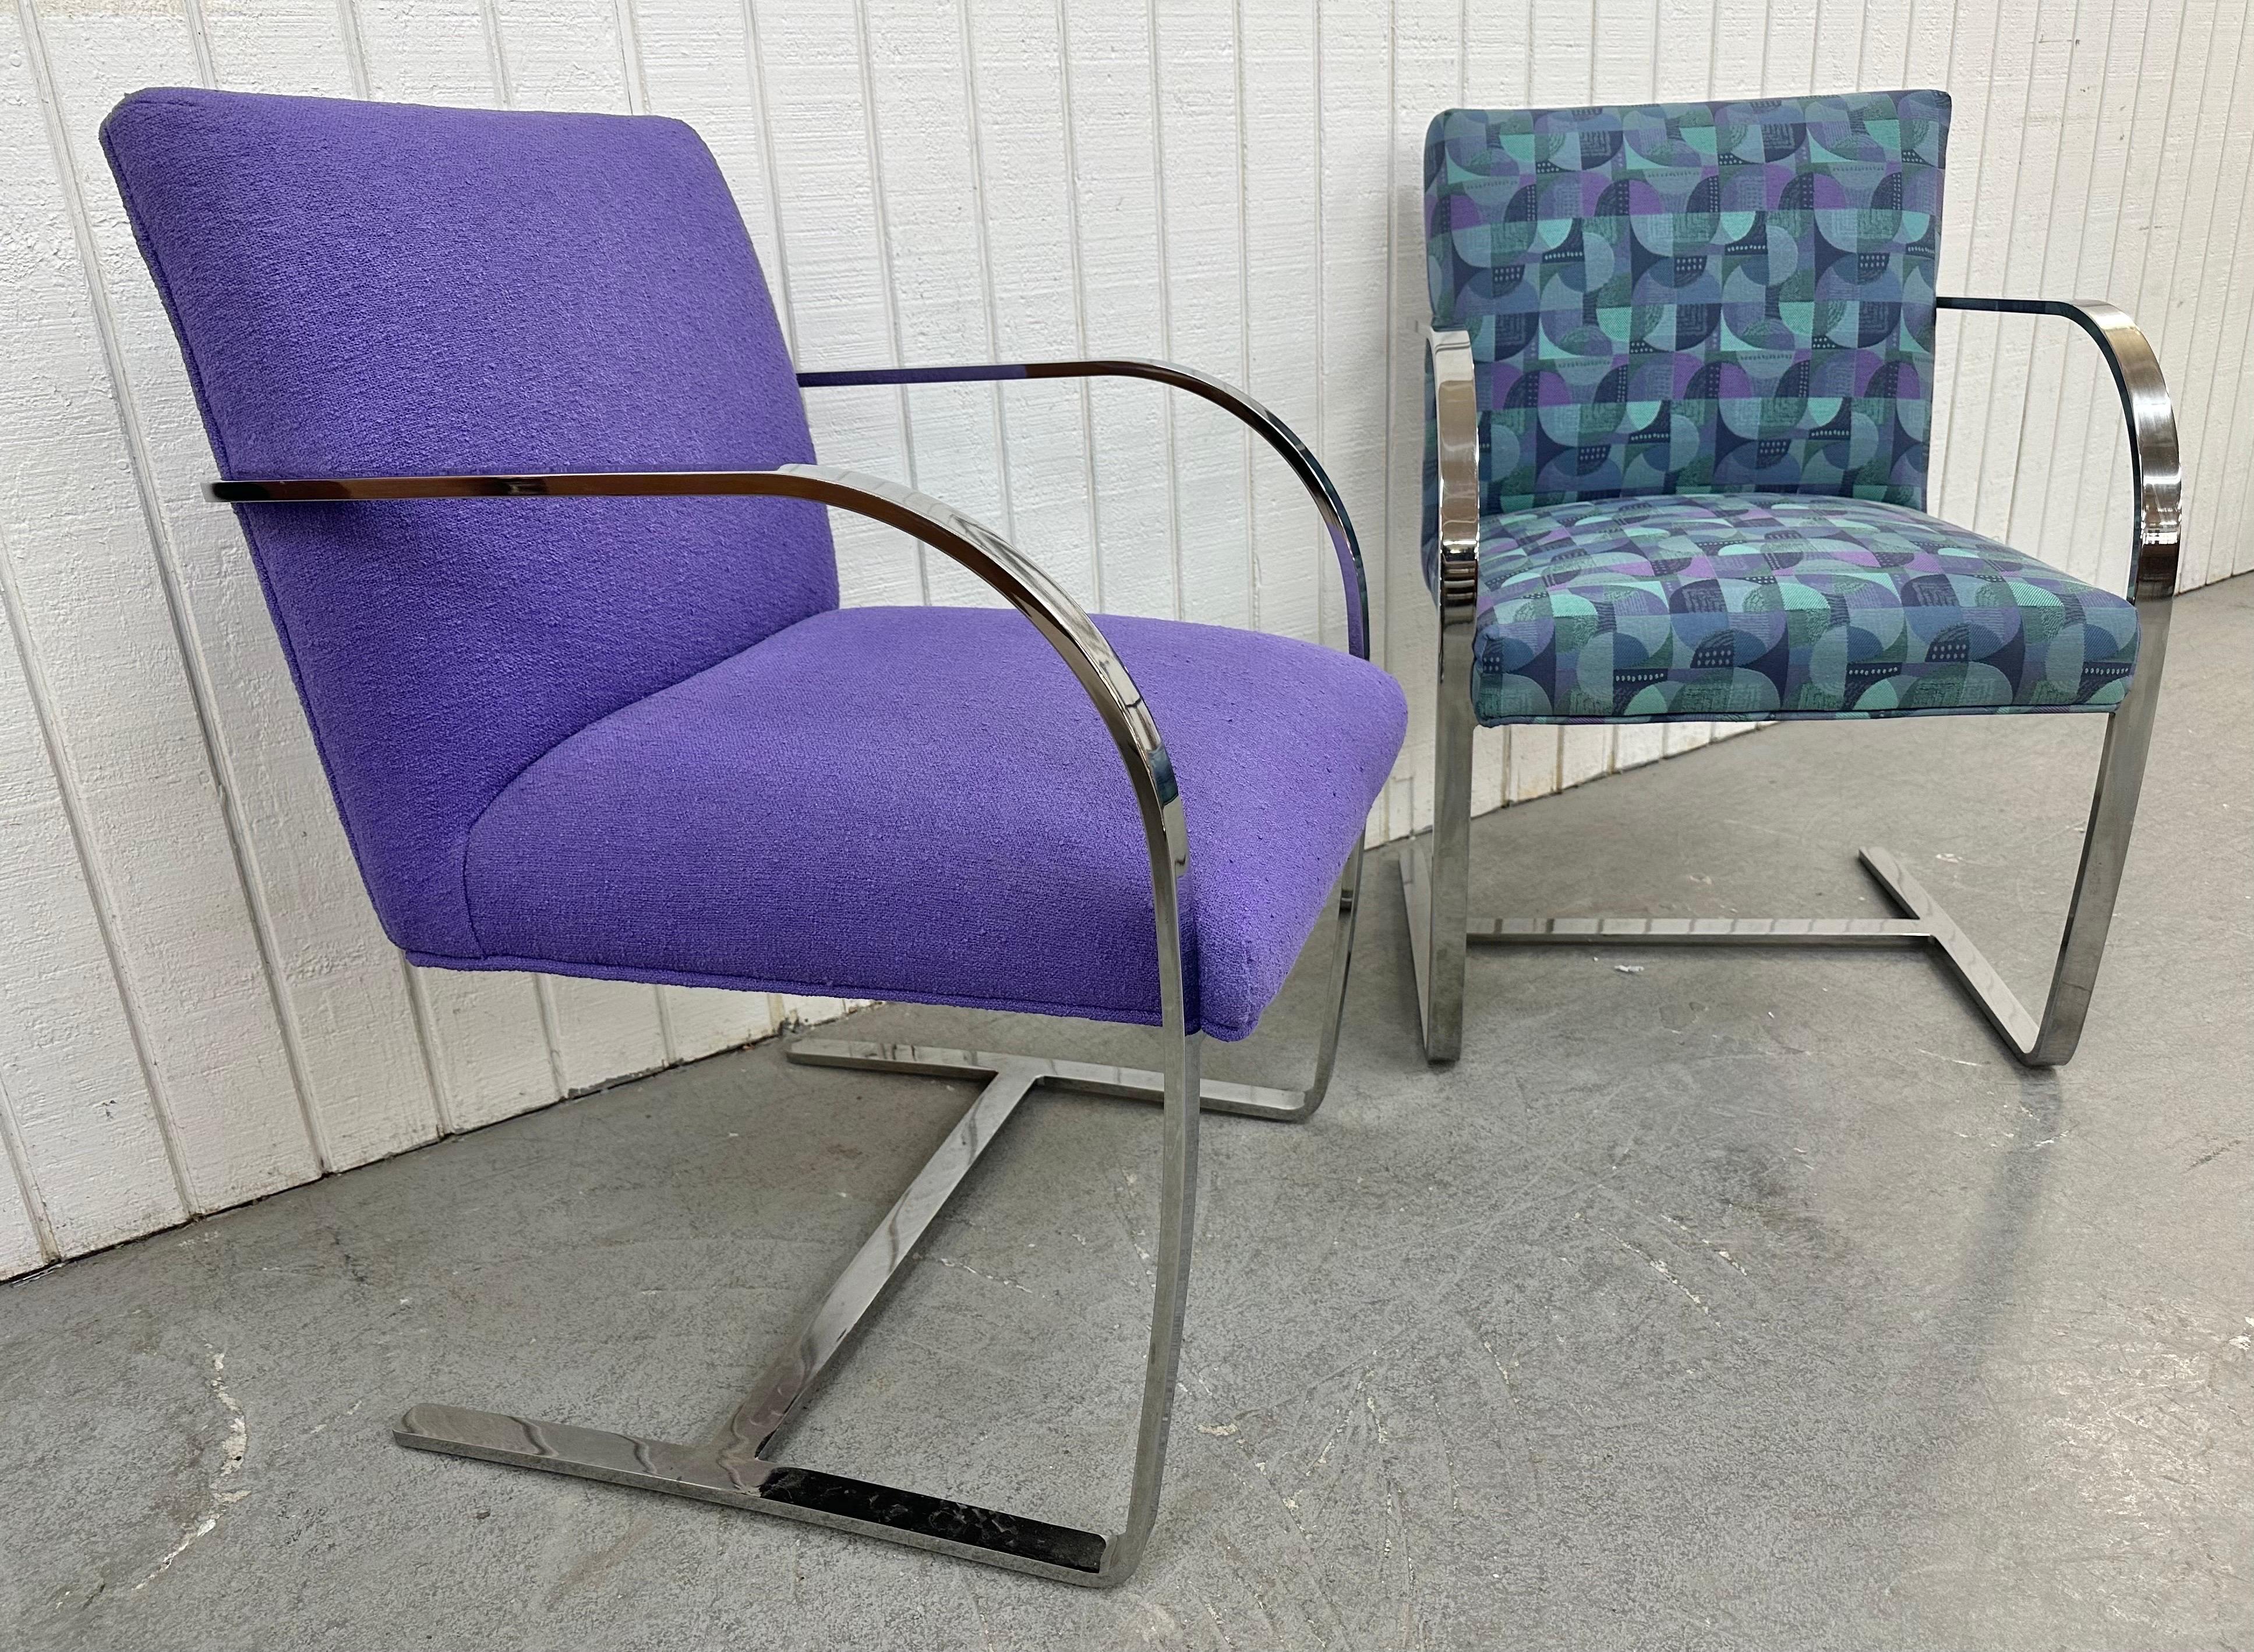 This listing is for a pair of Vintage Modern Bruno Chrome Arm Chairs. Featuring a Bruno style design, flat bar chrome frames, and purple/geometrical upholstered body. This is an exceptional combination of quality and design!